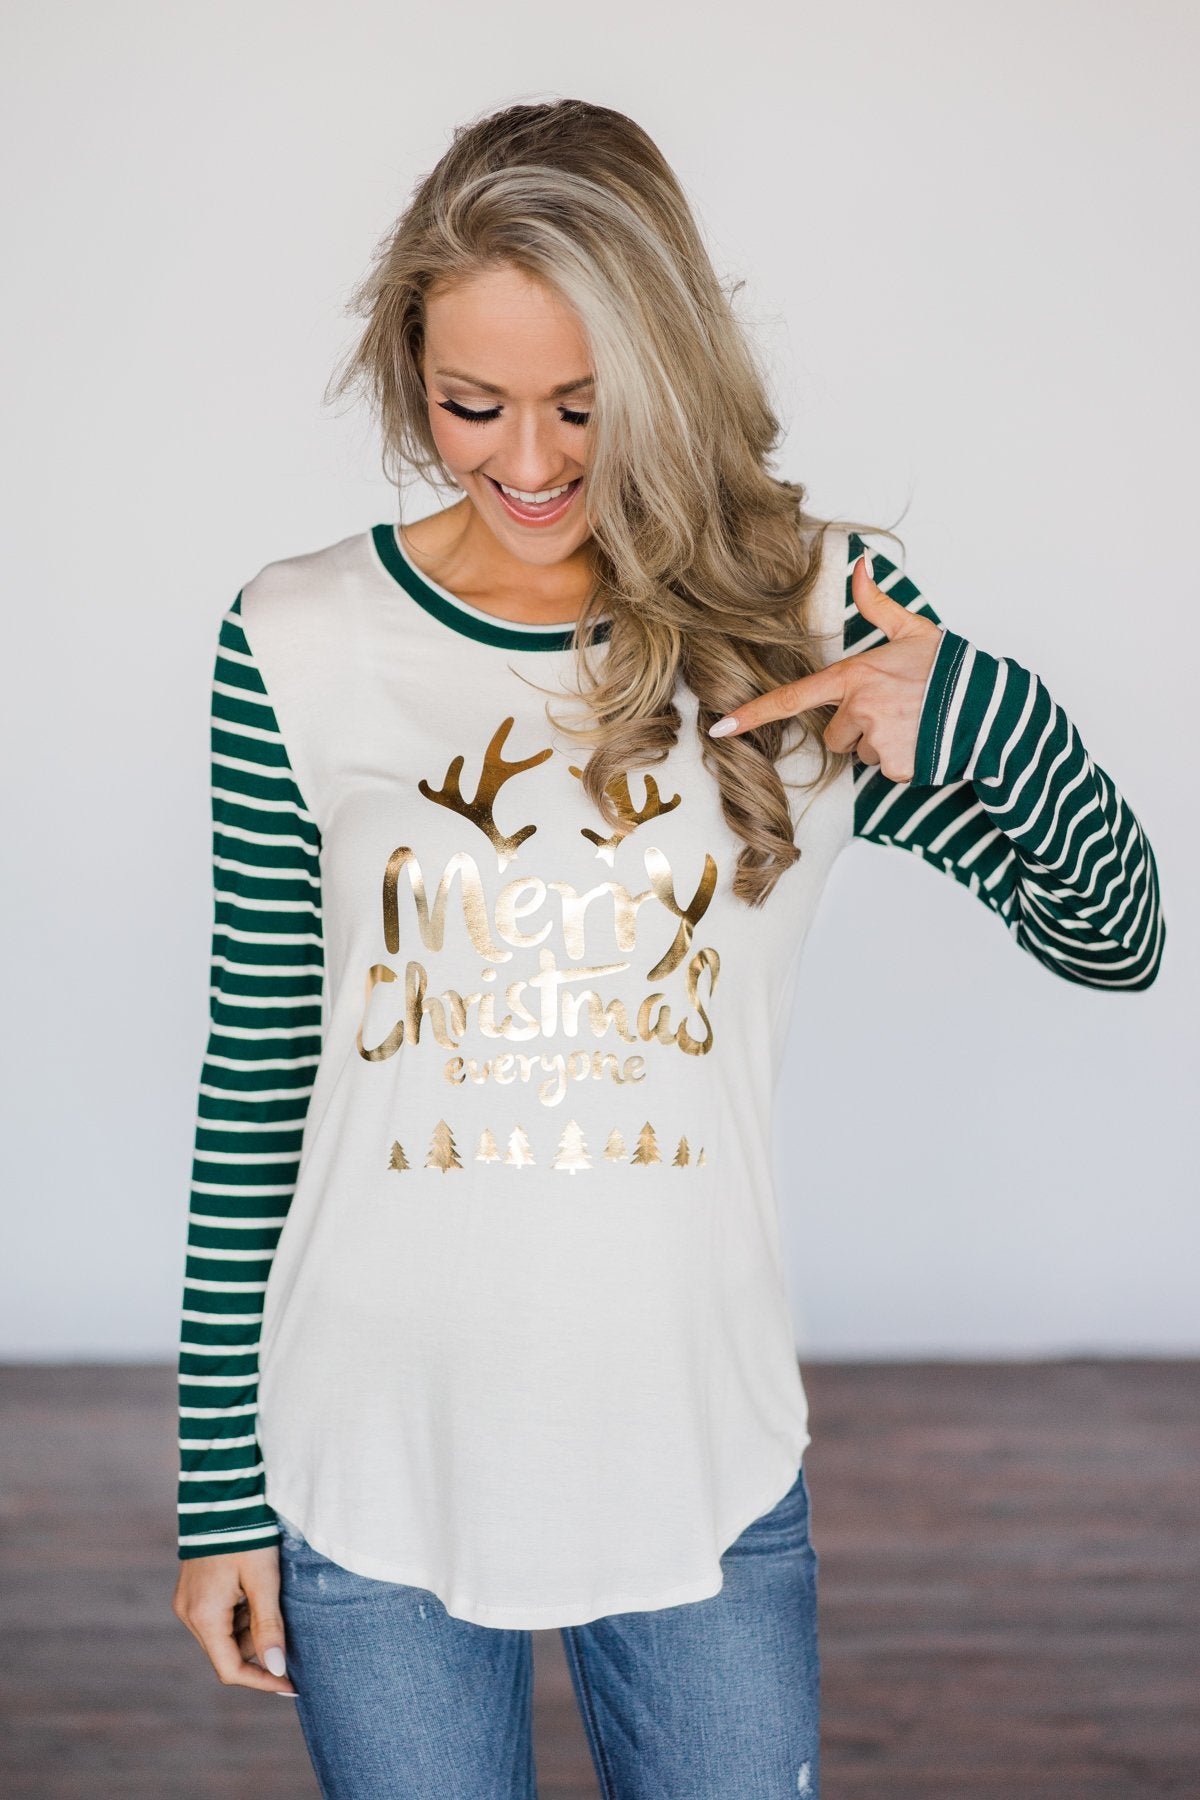 "Merry Christmas Everyone" Teal Striped Top